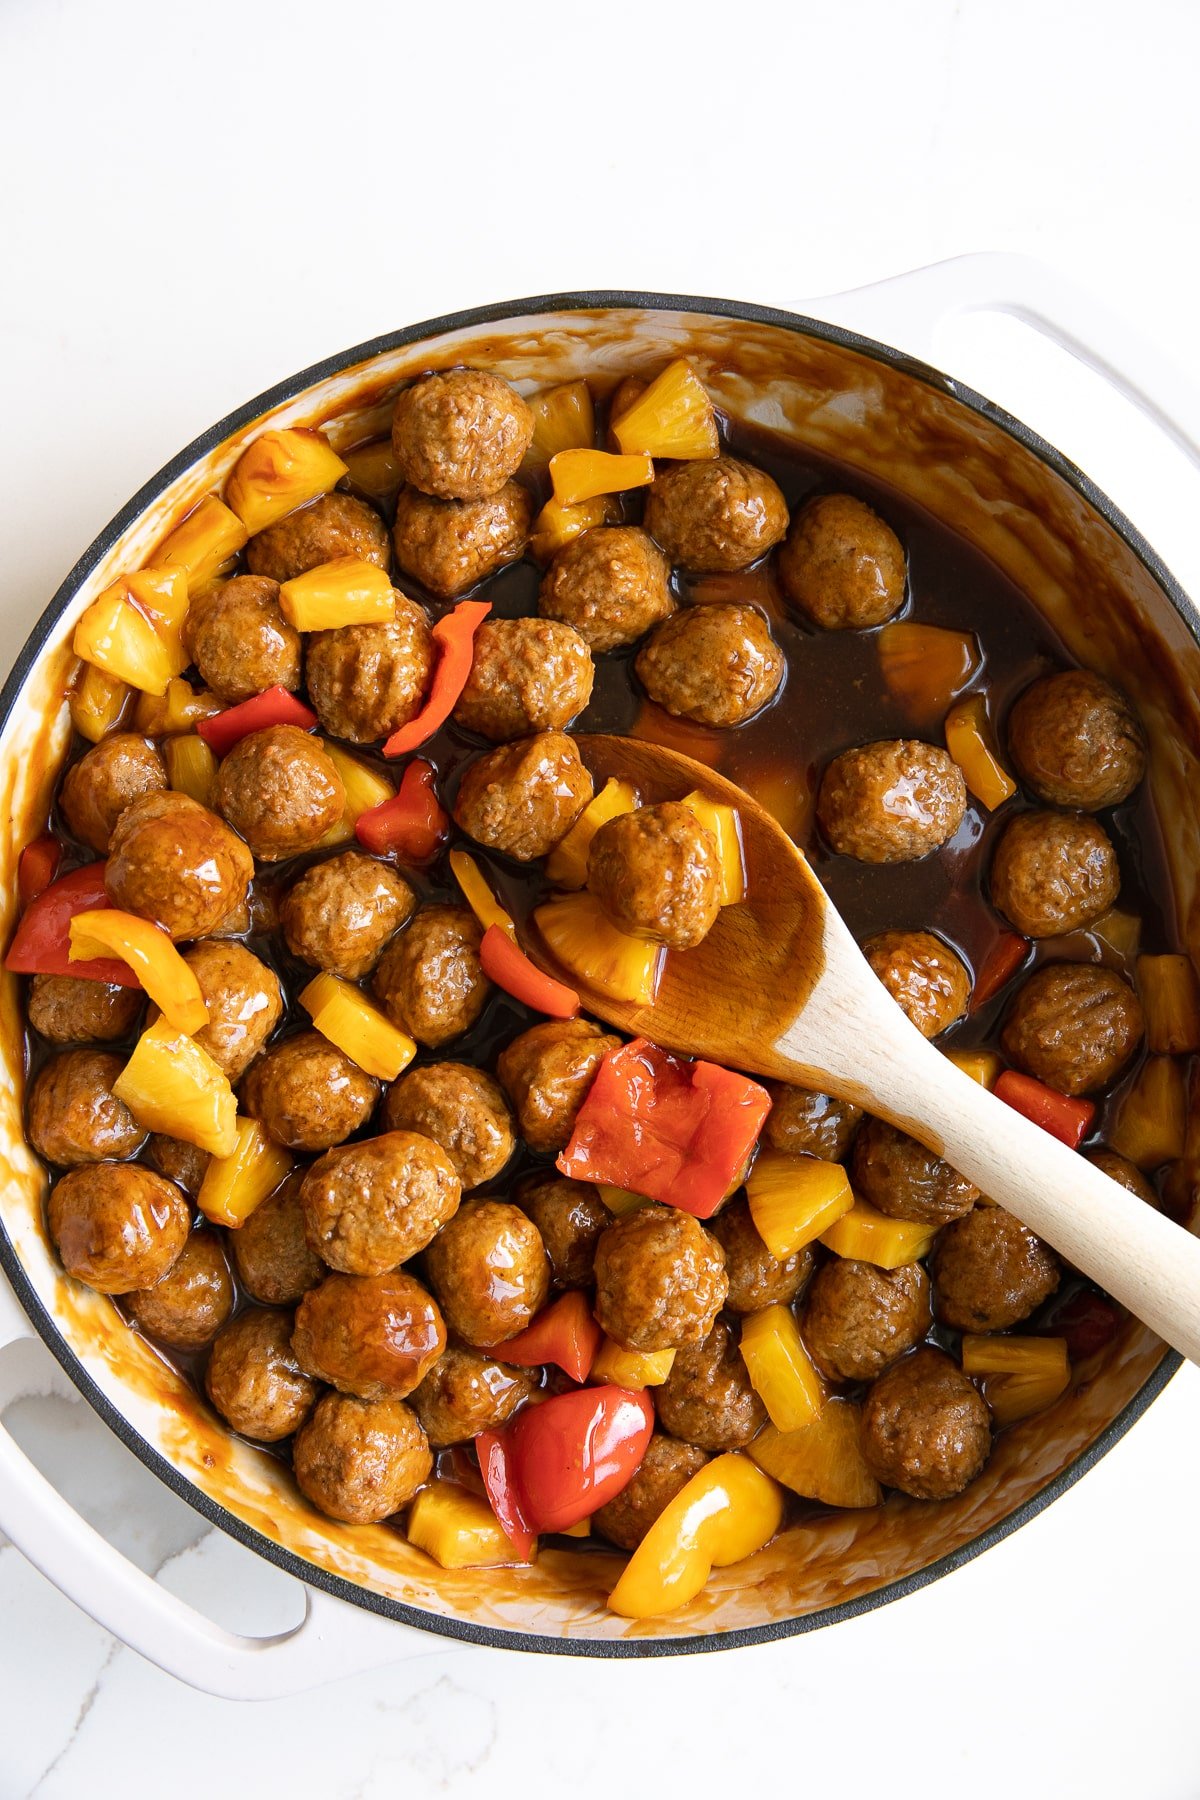 Large white skillet filled with cooked frozen meatballs, pineapple, and bell peppers in a sweet and sour sauce.